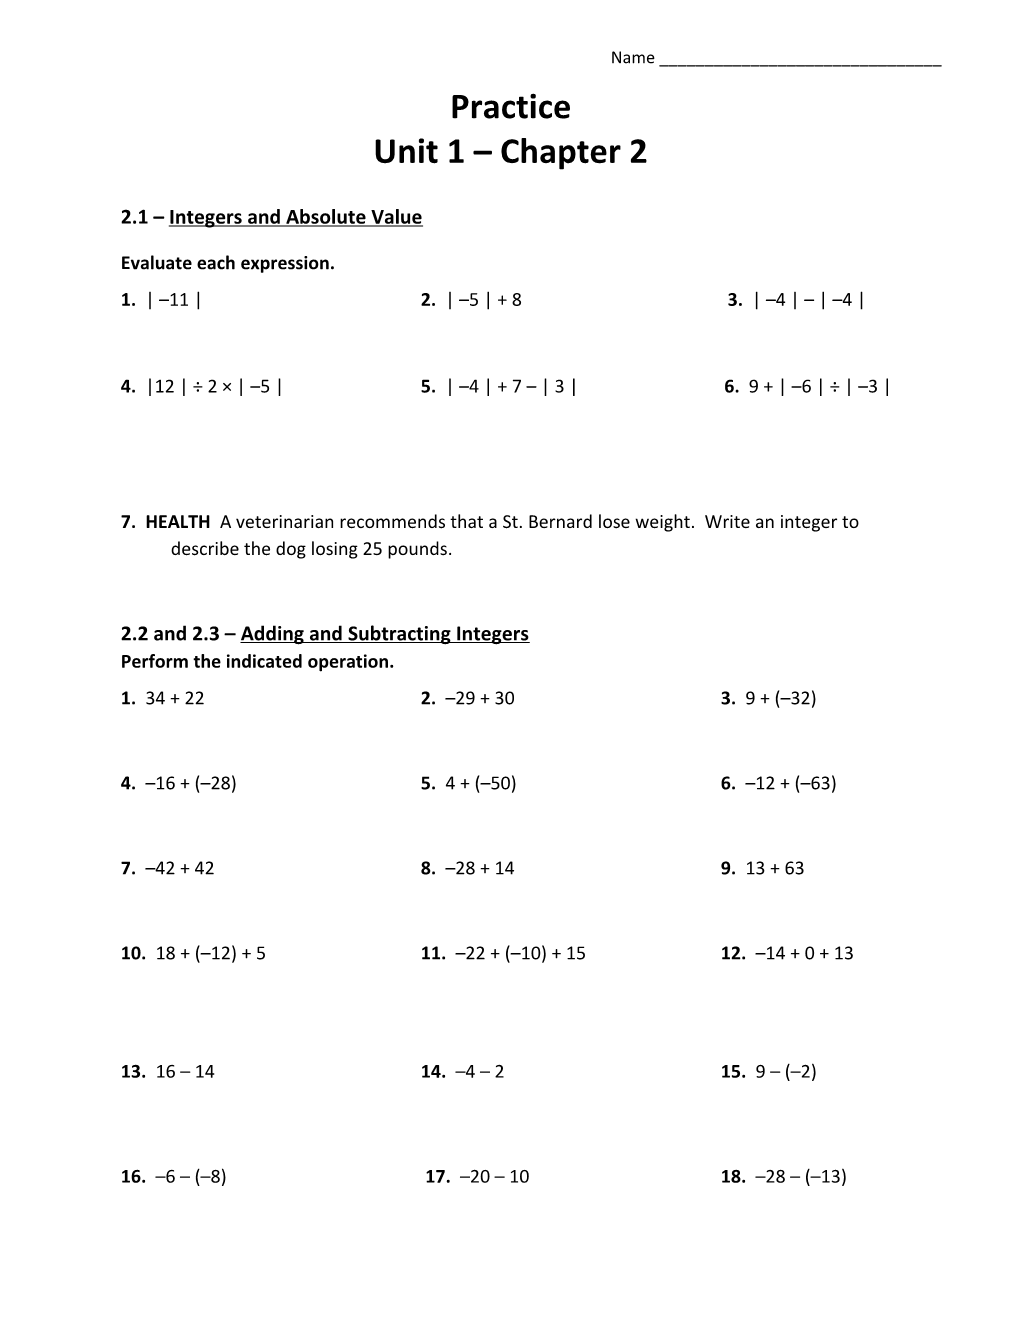 2.1 Integers and Absolute Value